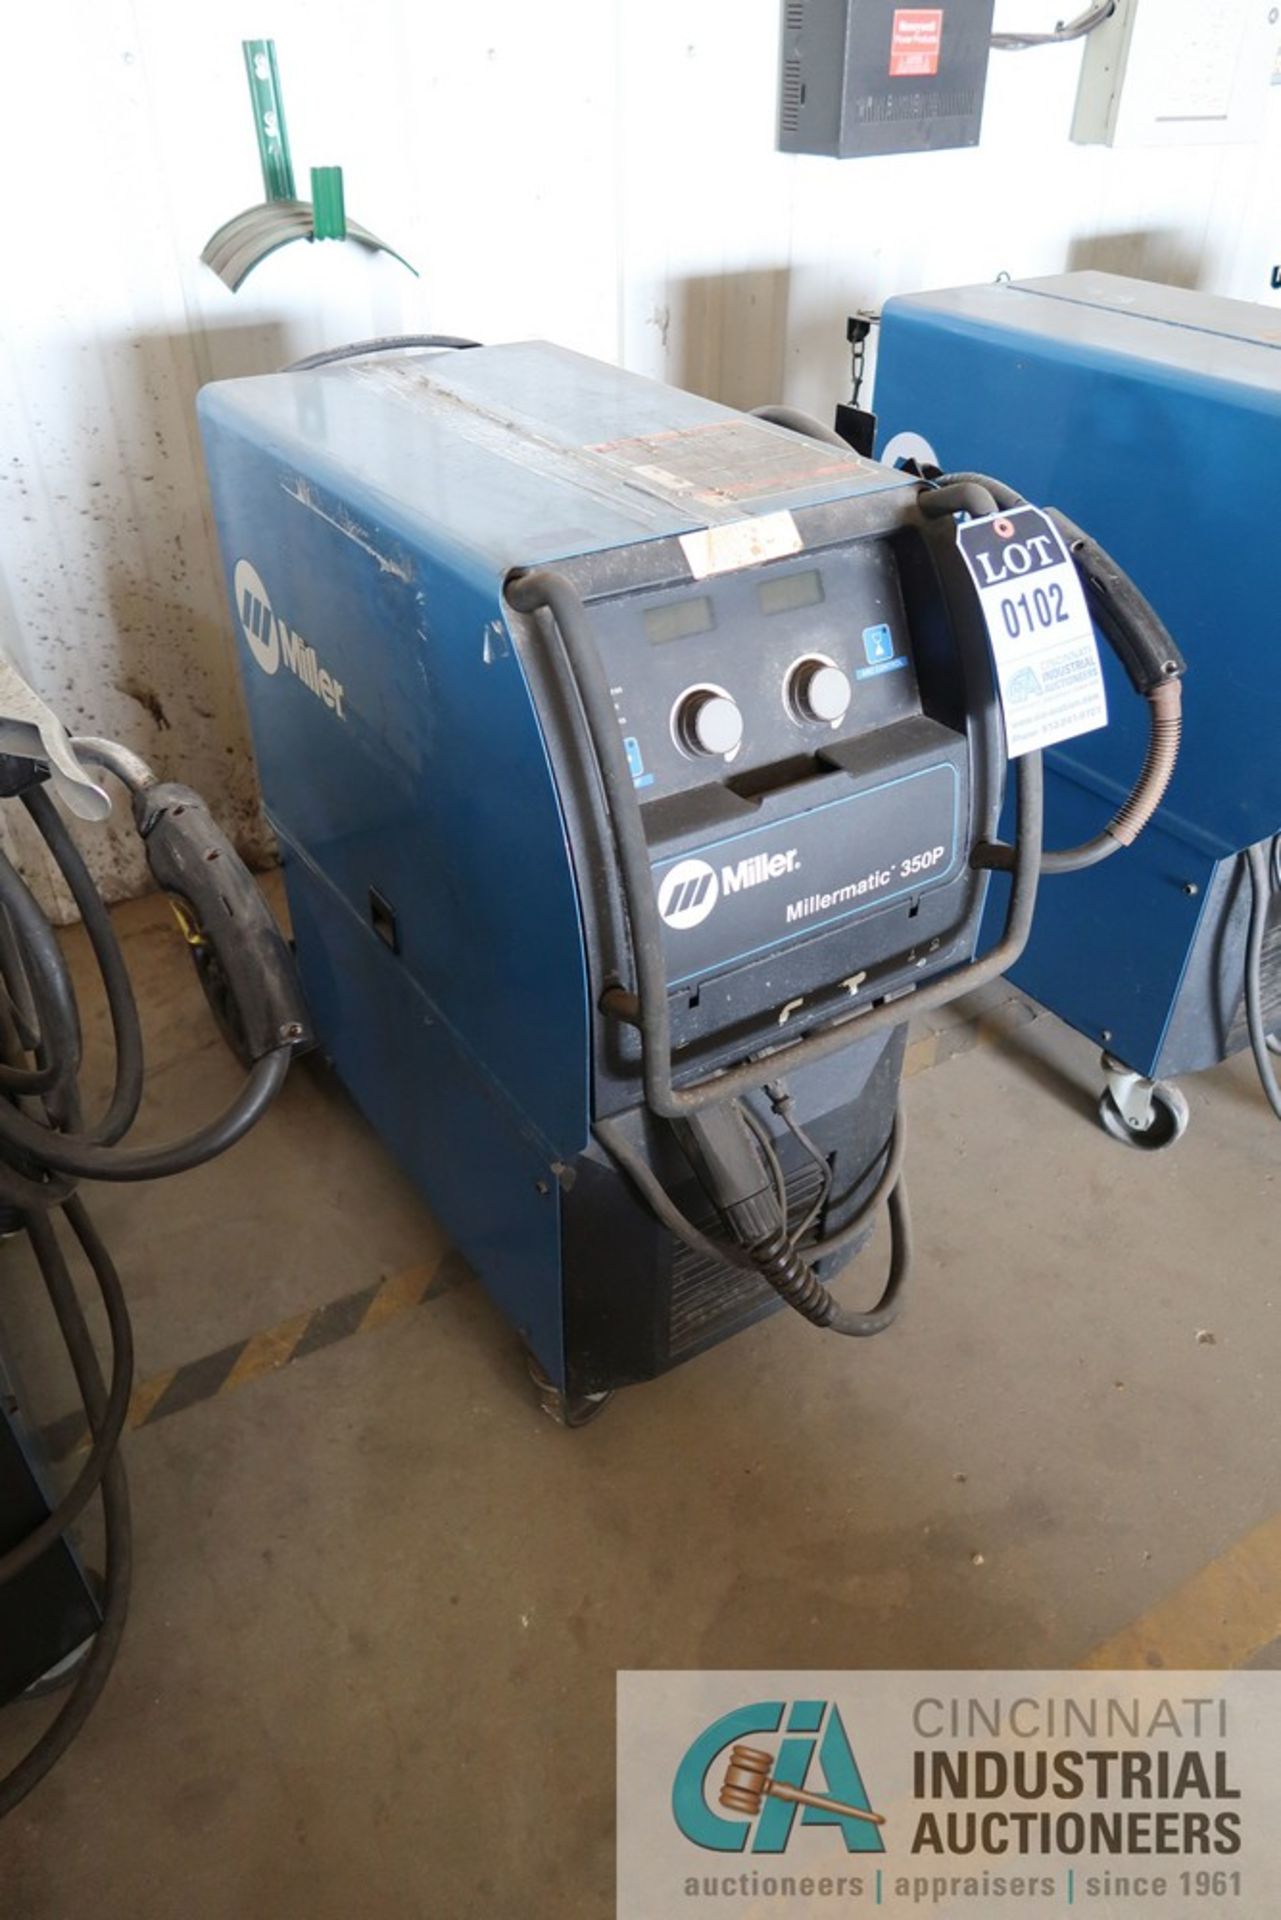 MILLER MODEL MILLERMATIC 350P MIG WELDING POWER SOURCE S/N MB310556N WITH BUILT IN WIRE FEEDER AND